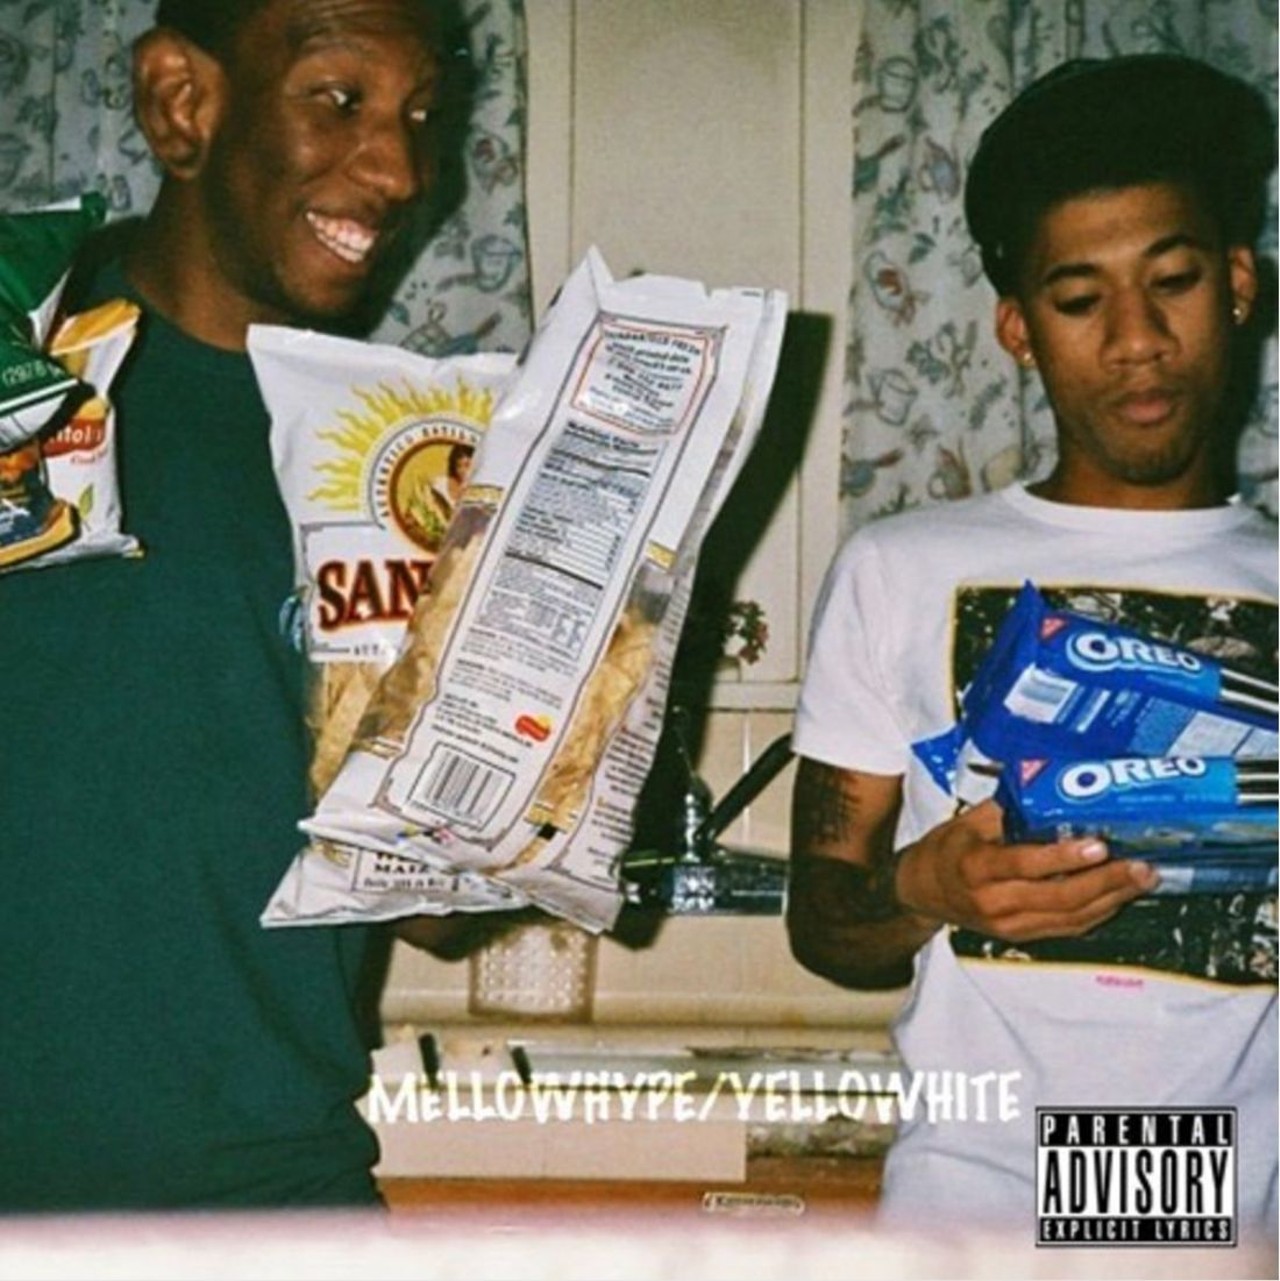  "Rasta," by MellowHype ft. Tyler the Creator
The members of Odd Future may all be currently working on separate things, but there was one time when ringleader Tyler the Creator threw Cleveland a quick shoutout on this Mellowhype track. "My n**** Brain Leftin', O-high like Cleveland."     
Yellowhite album art